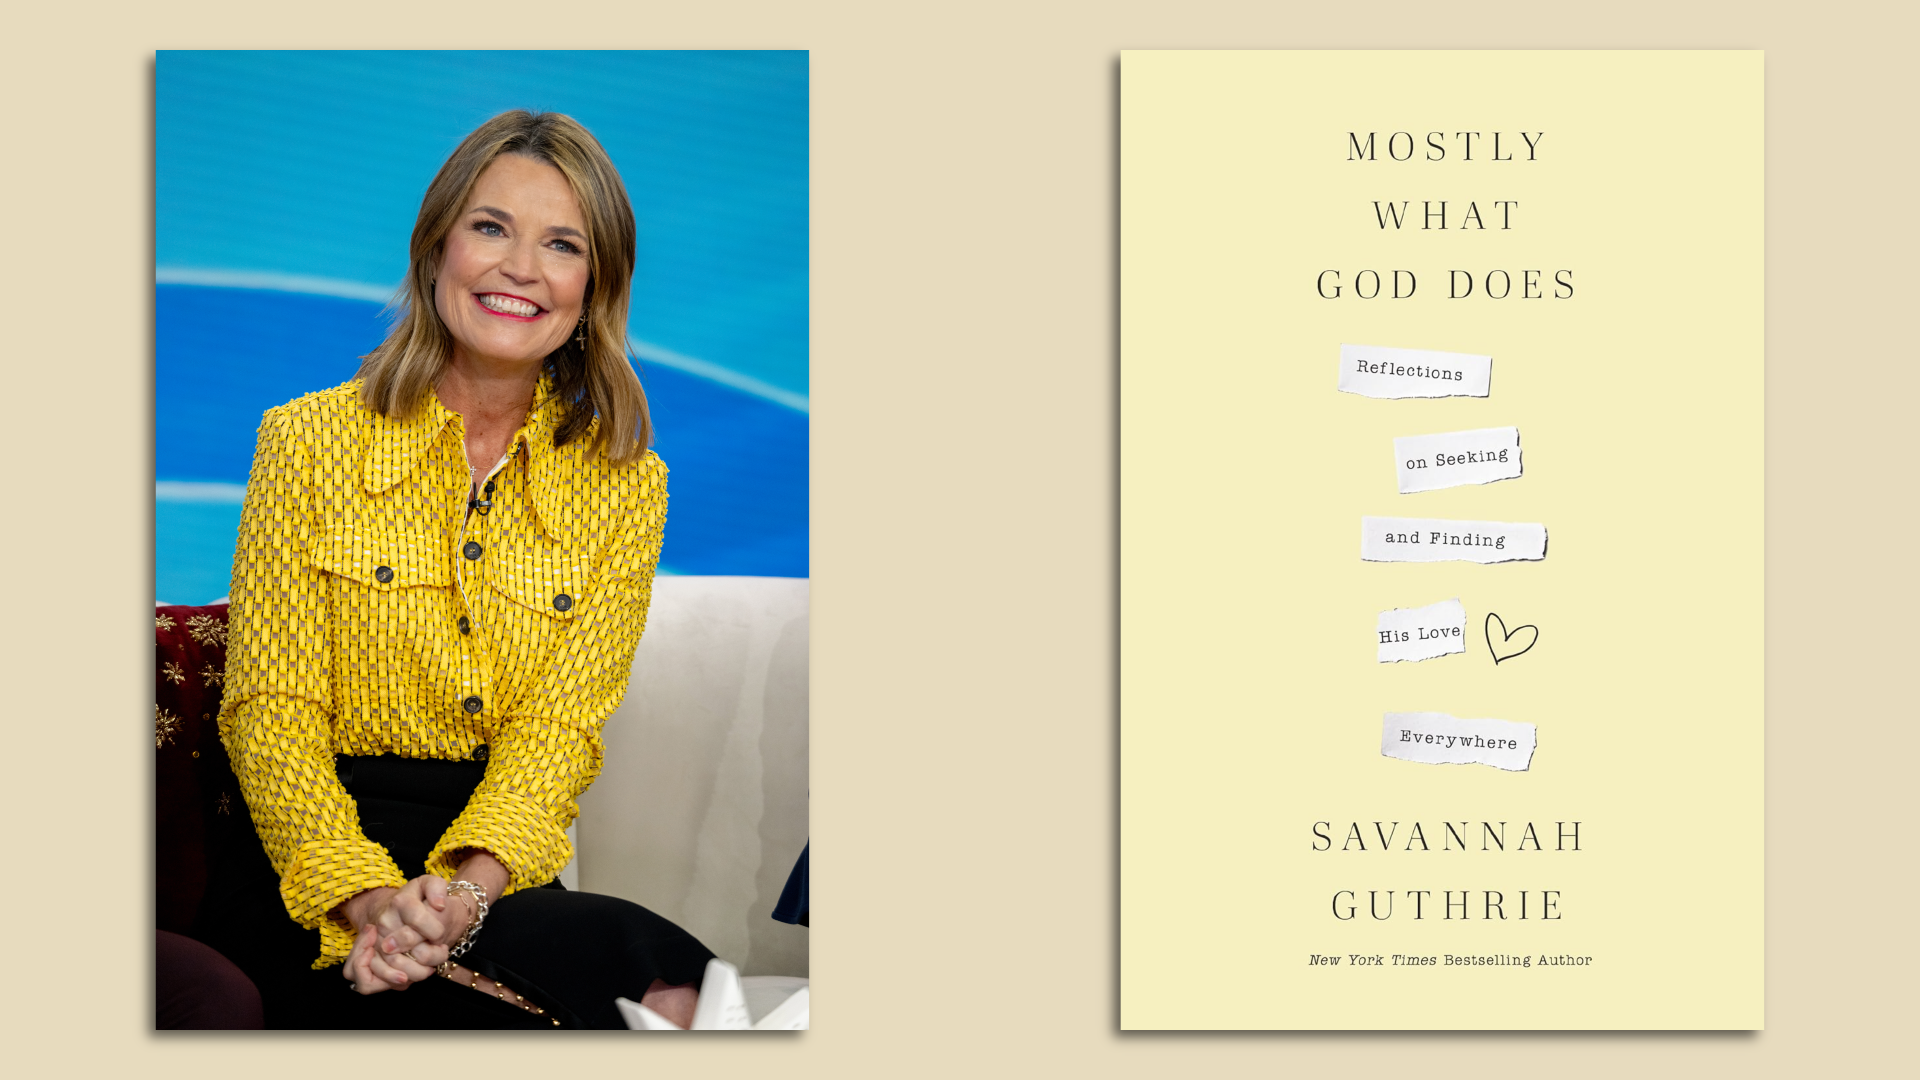 Savannah Guthrie explains why she wrote a book about her